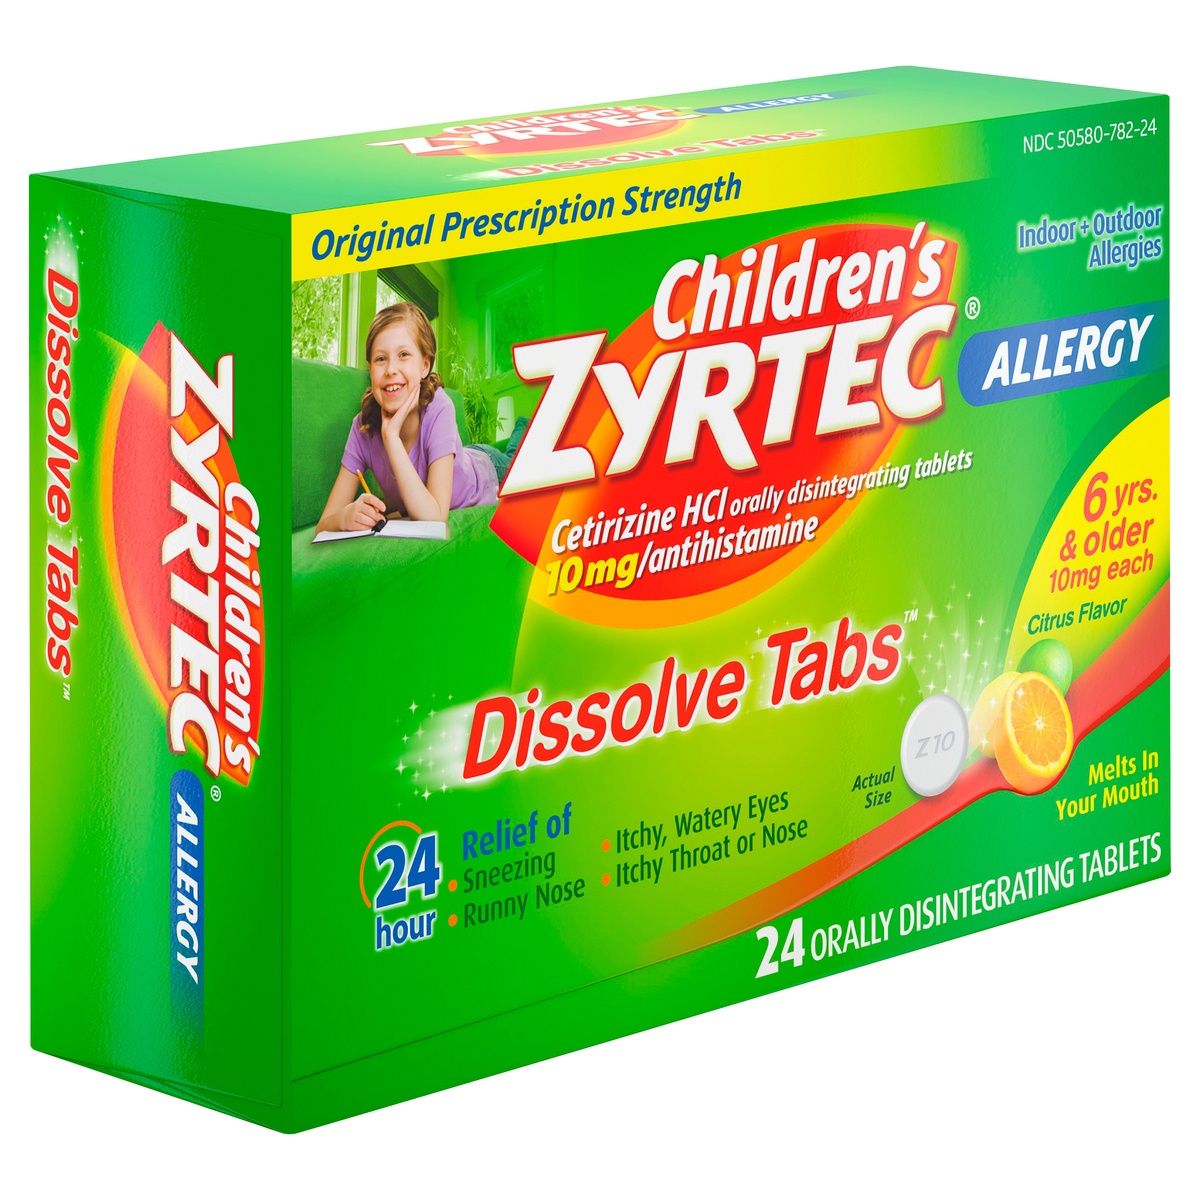 slide 2 of 7, Children's Zyrtec 24 Hour Dissolving Allergy Relief Tablets with Cetirizine HCl, Citrus Flavored Antihistamine Allergy Medicine for Kids, Relieves Runny Nose, Itchy Throat & More, 24 ct